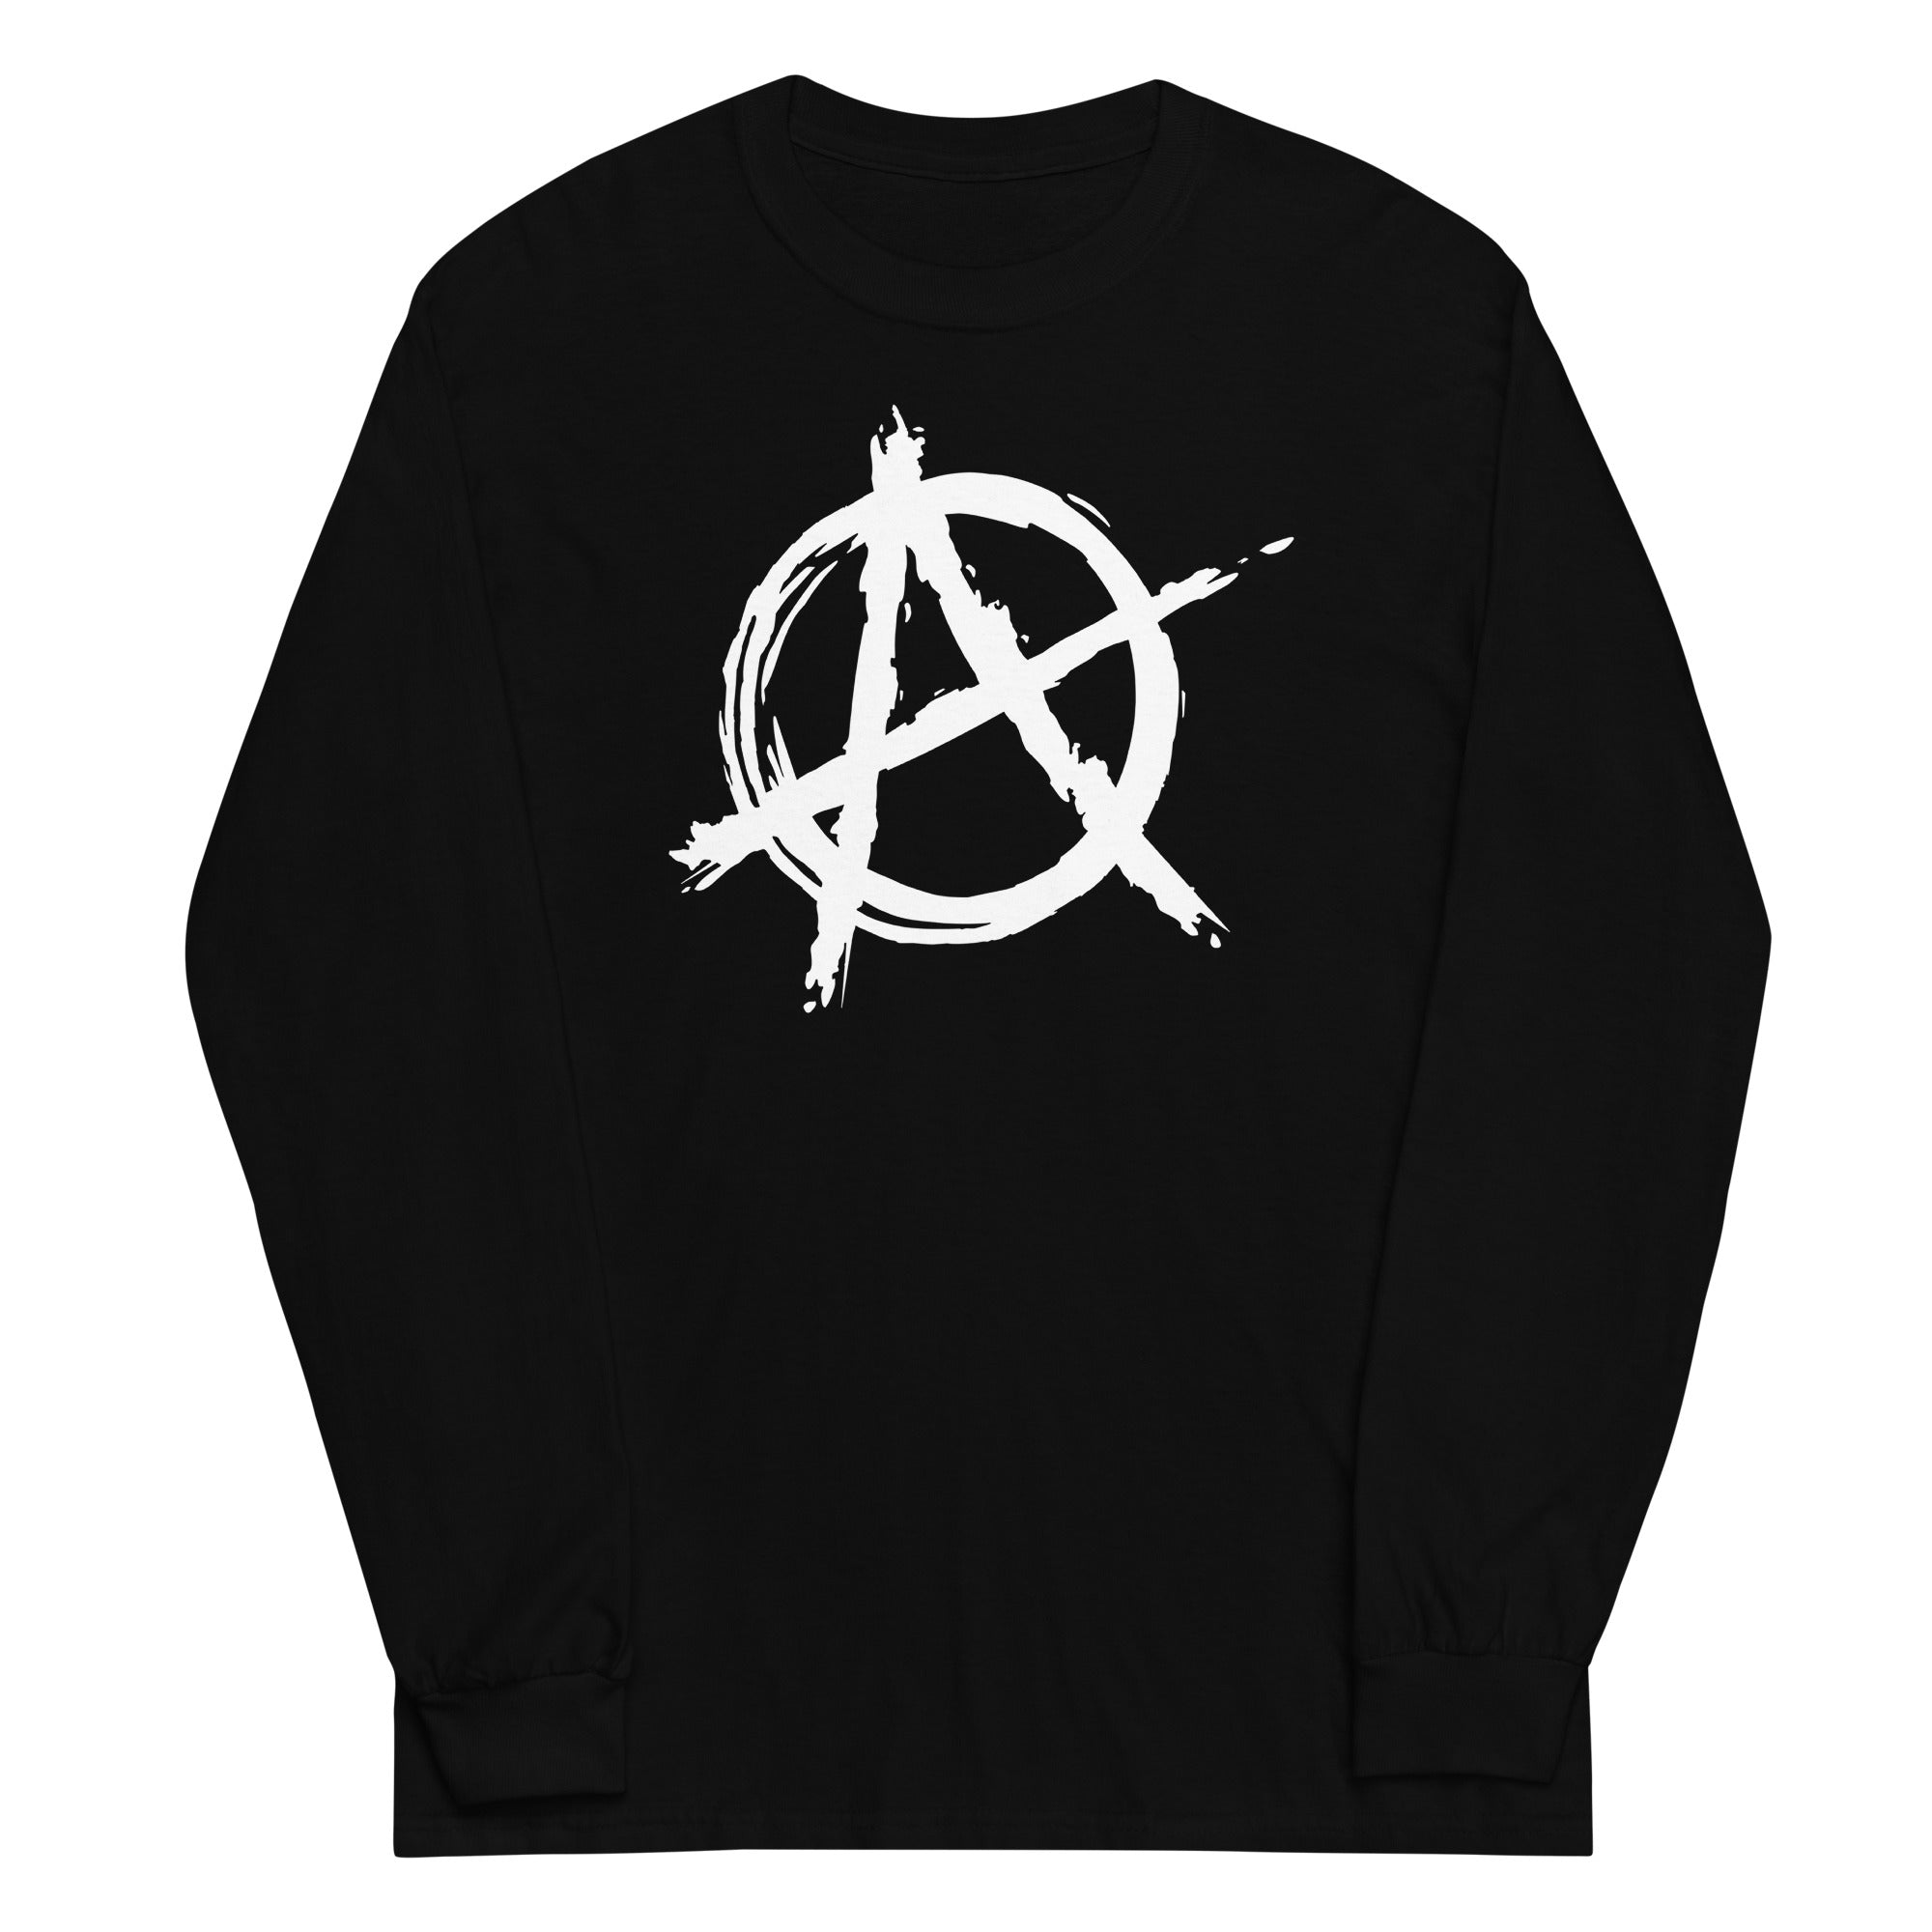 White Anarchy is Order Symbol Punk Rock Long Sleeve Shirt - Edge of Life Designs